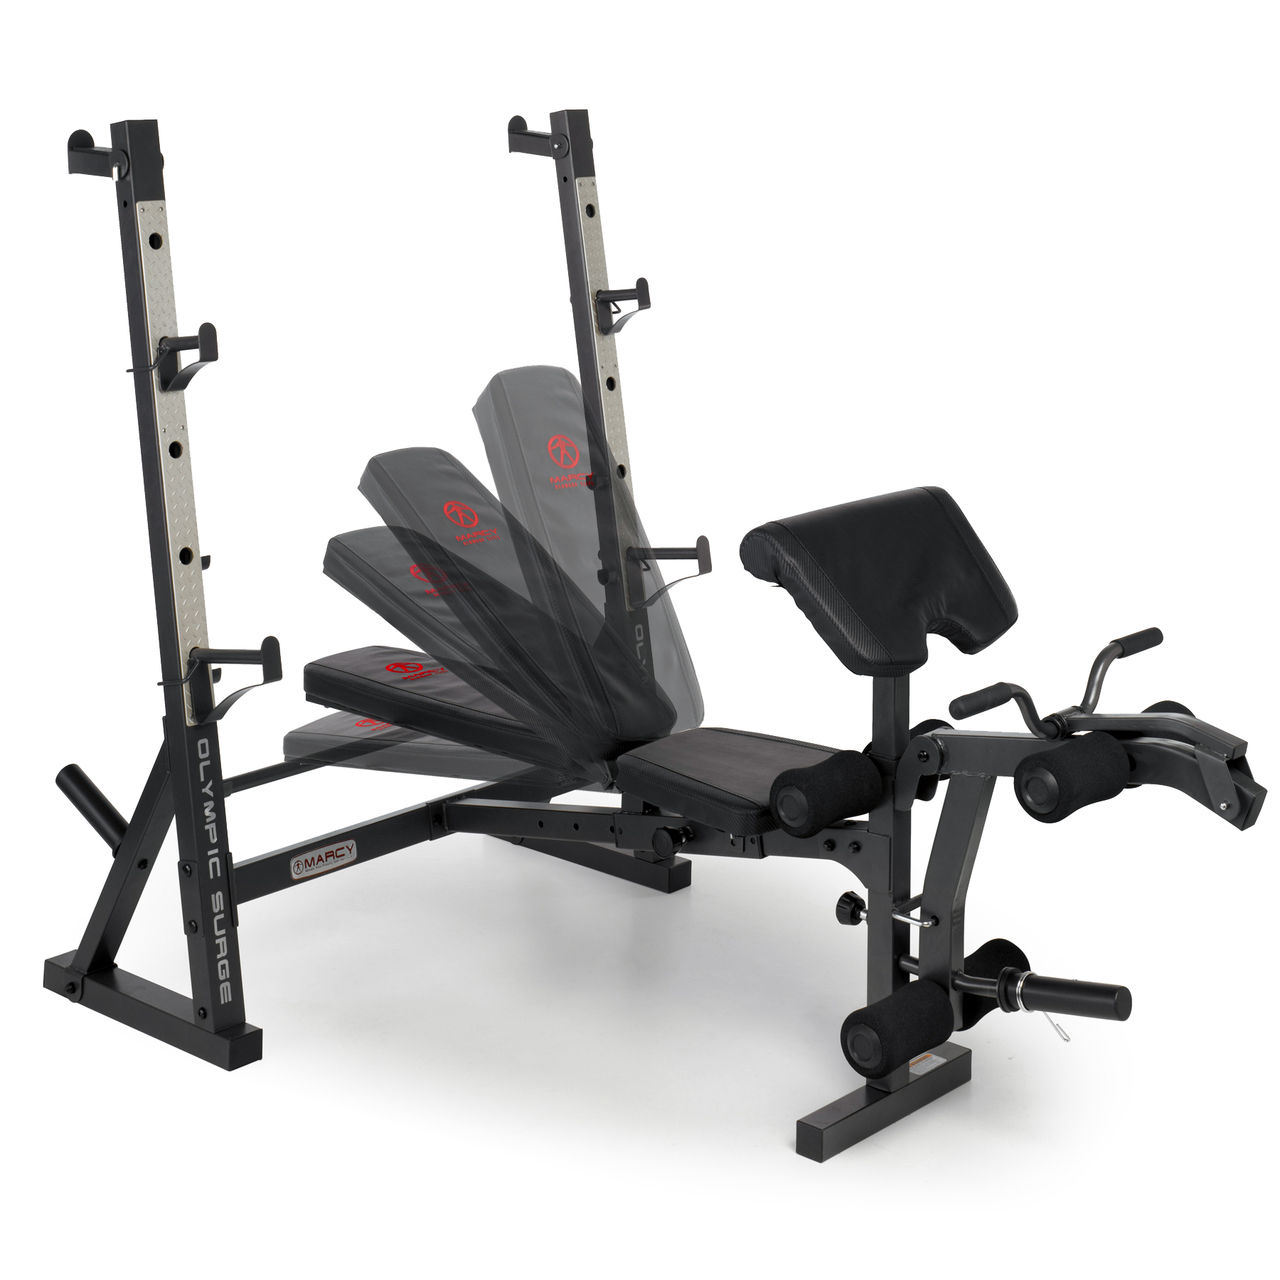  Marcy olympic workout bench with Comfort Workout Clothes